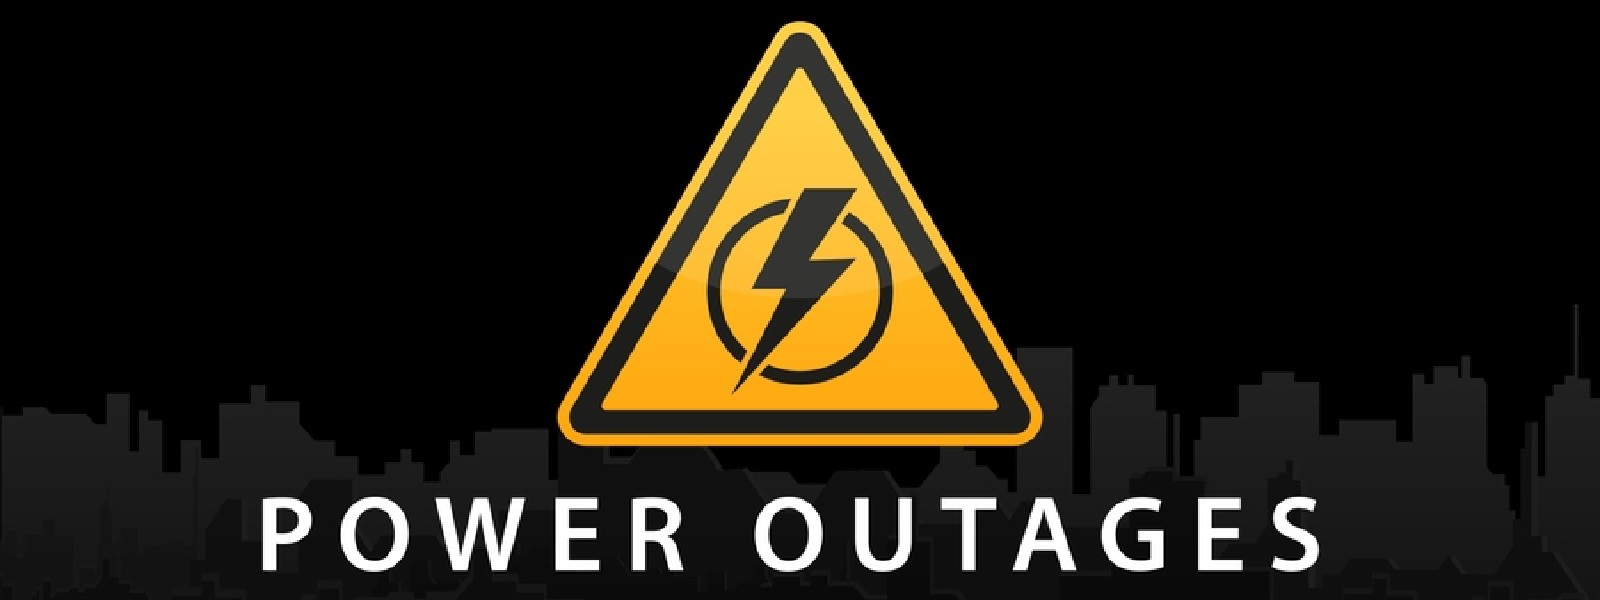 3-hour daily power outages during weekend